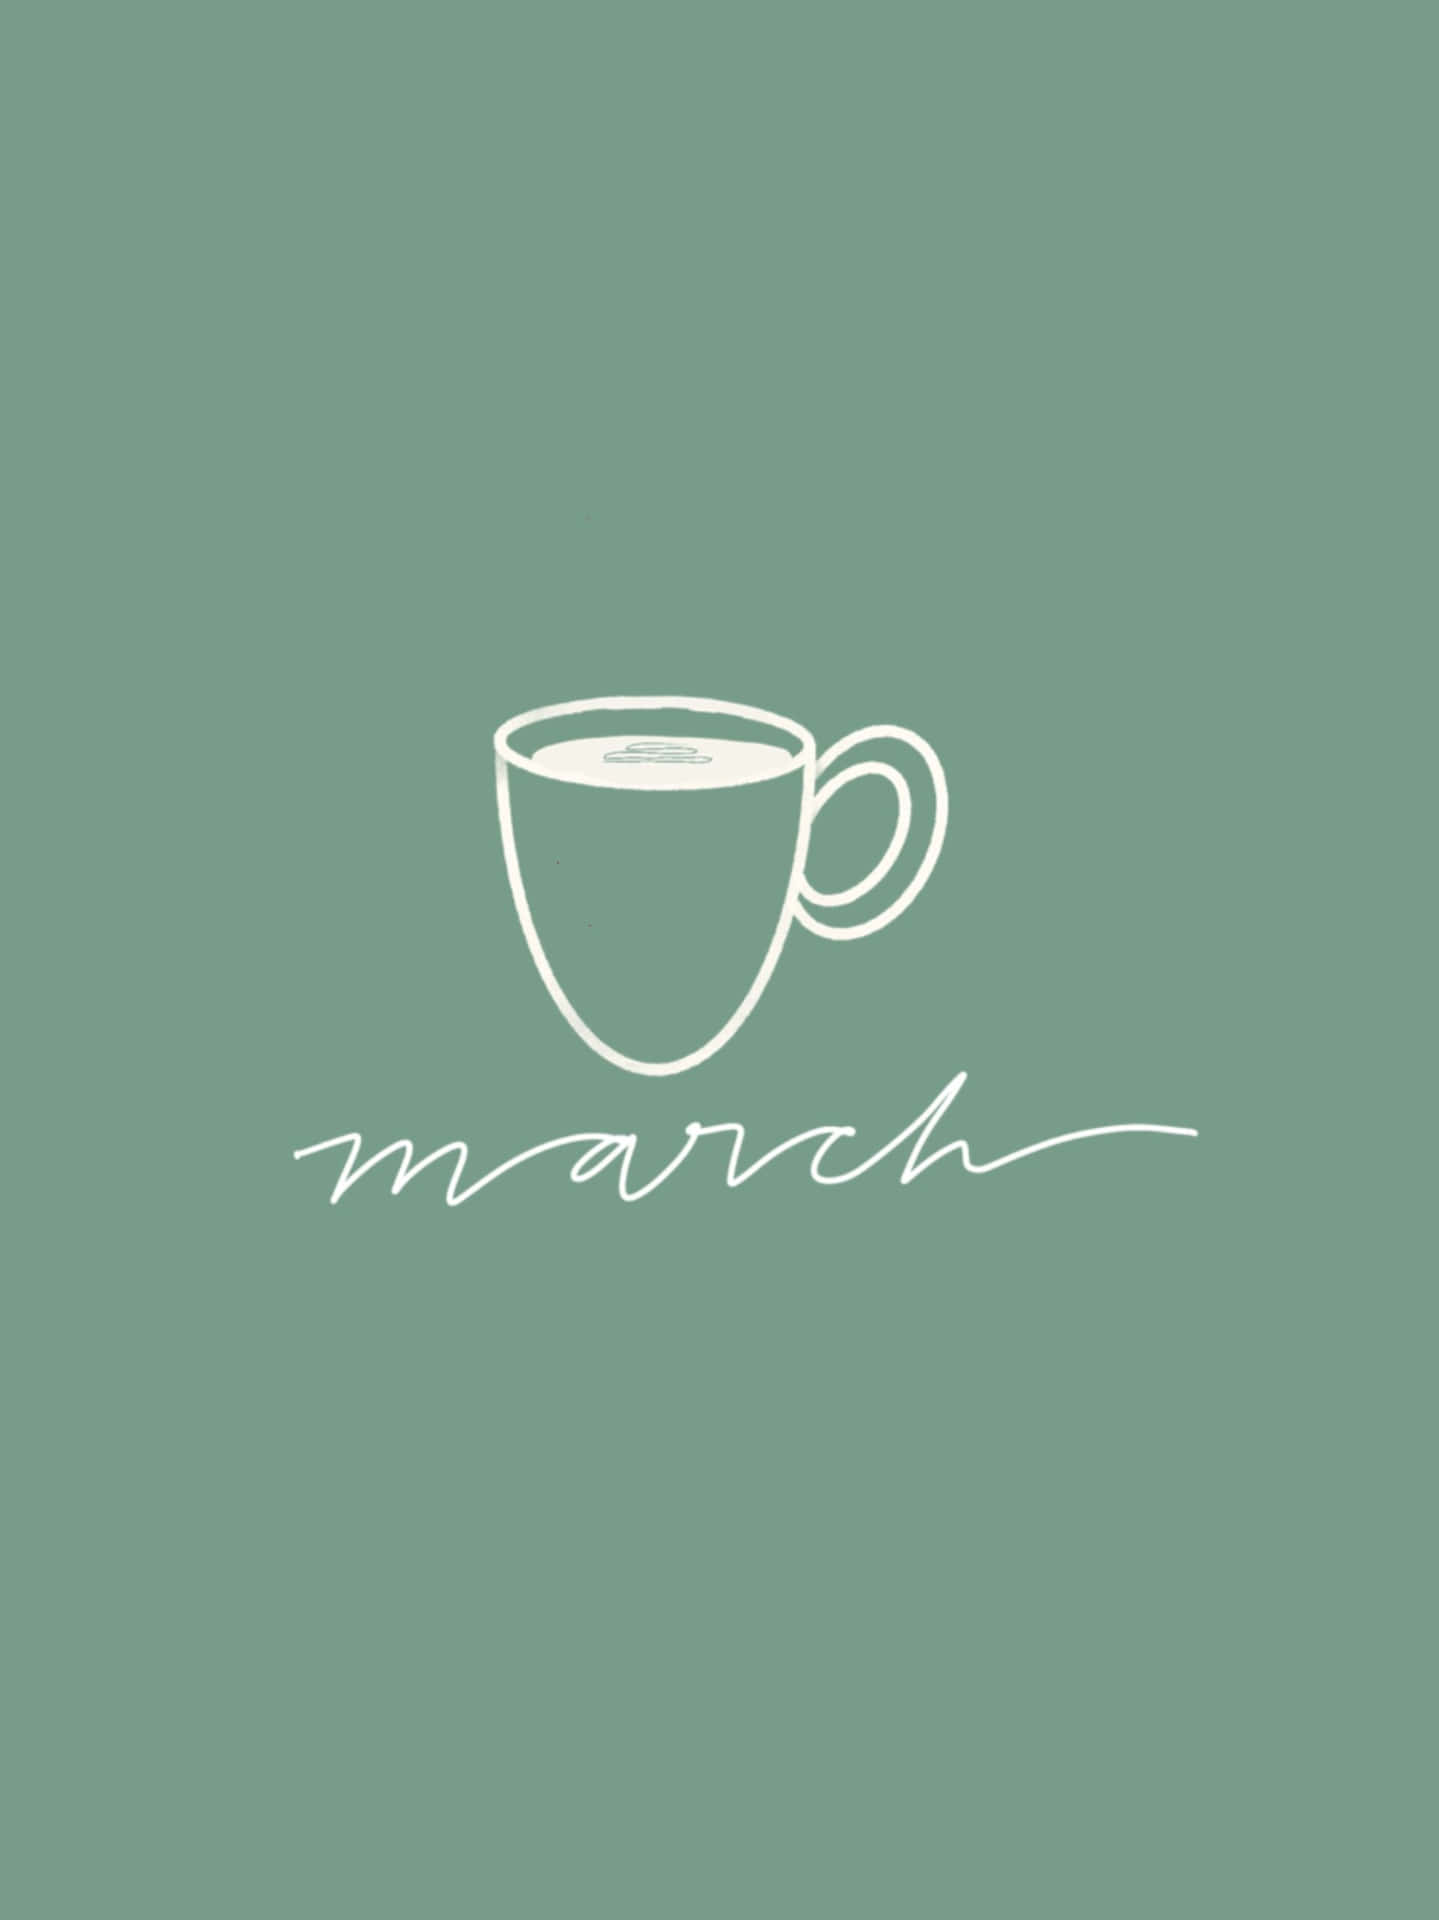 March Coffee Cup Art Wallpaper